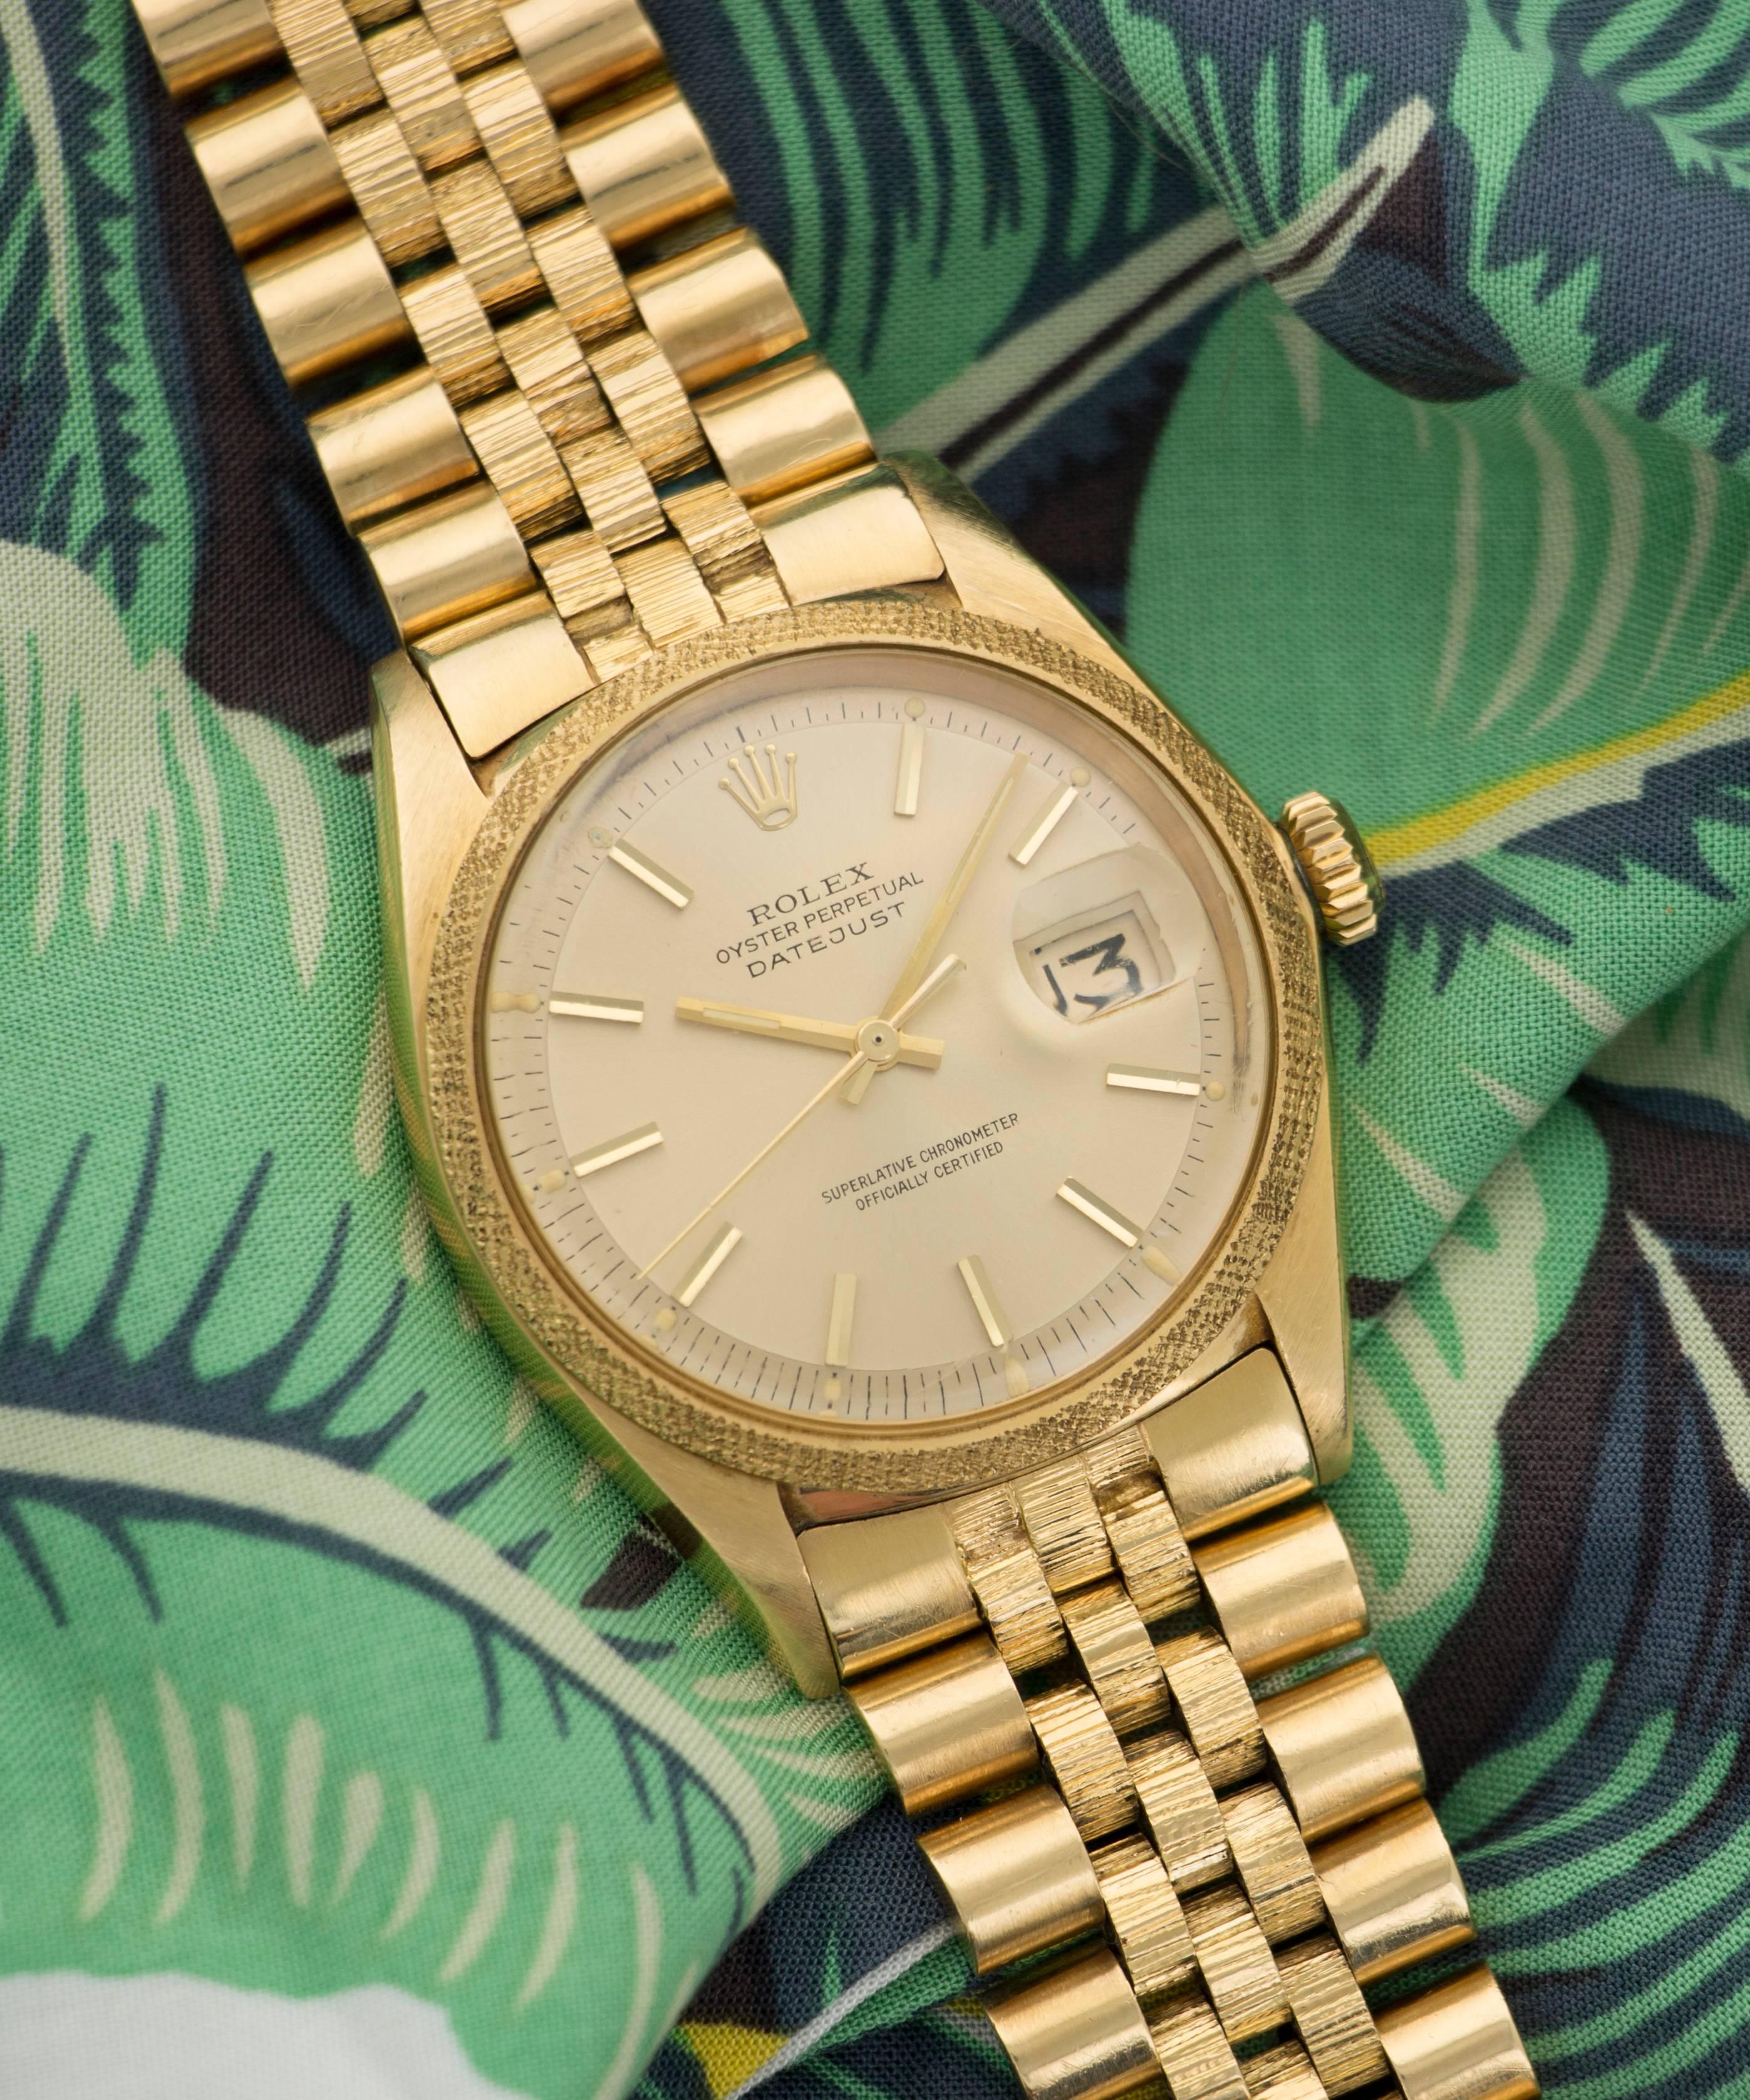 1960s Rolex Datejust, Model 1611 with 